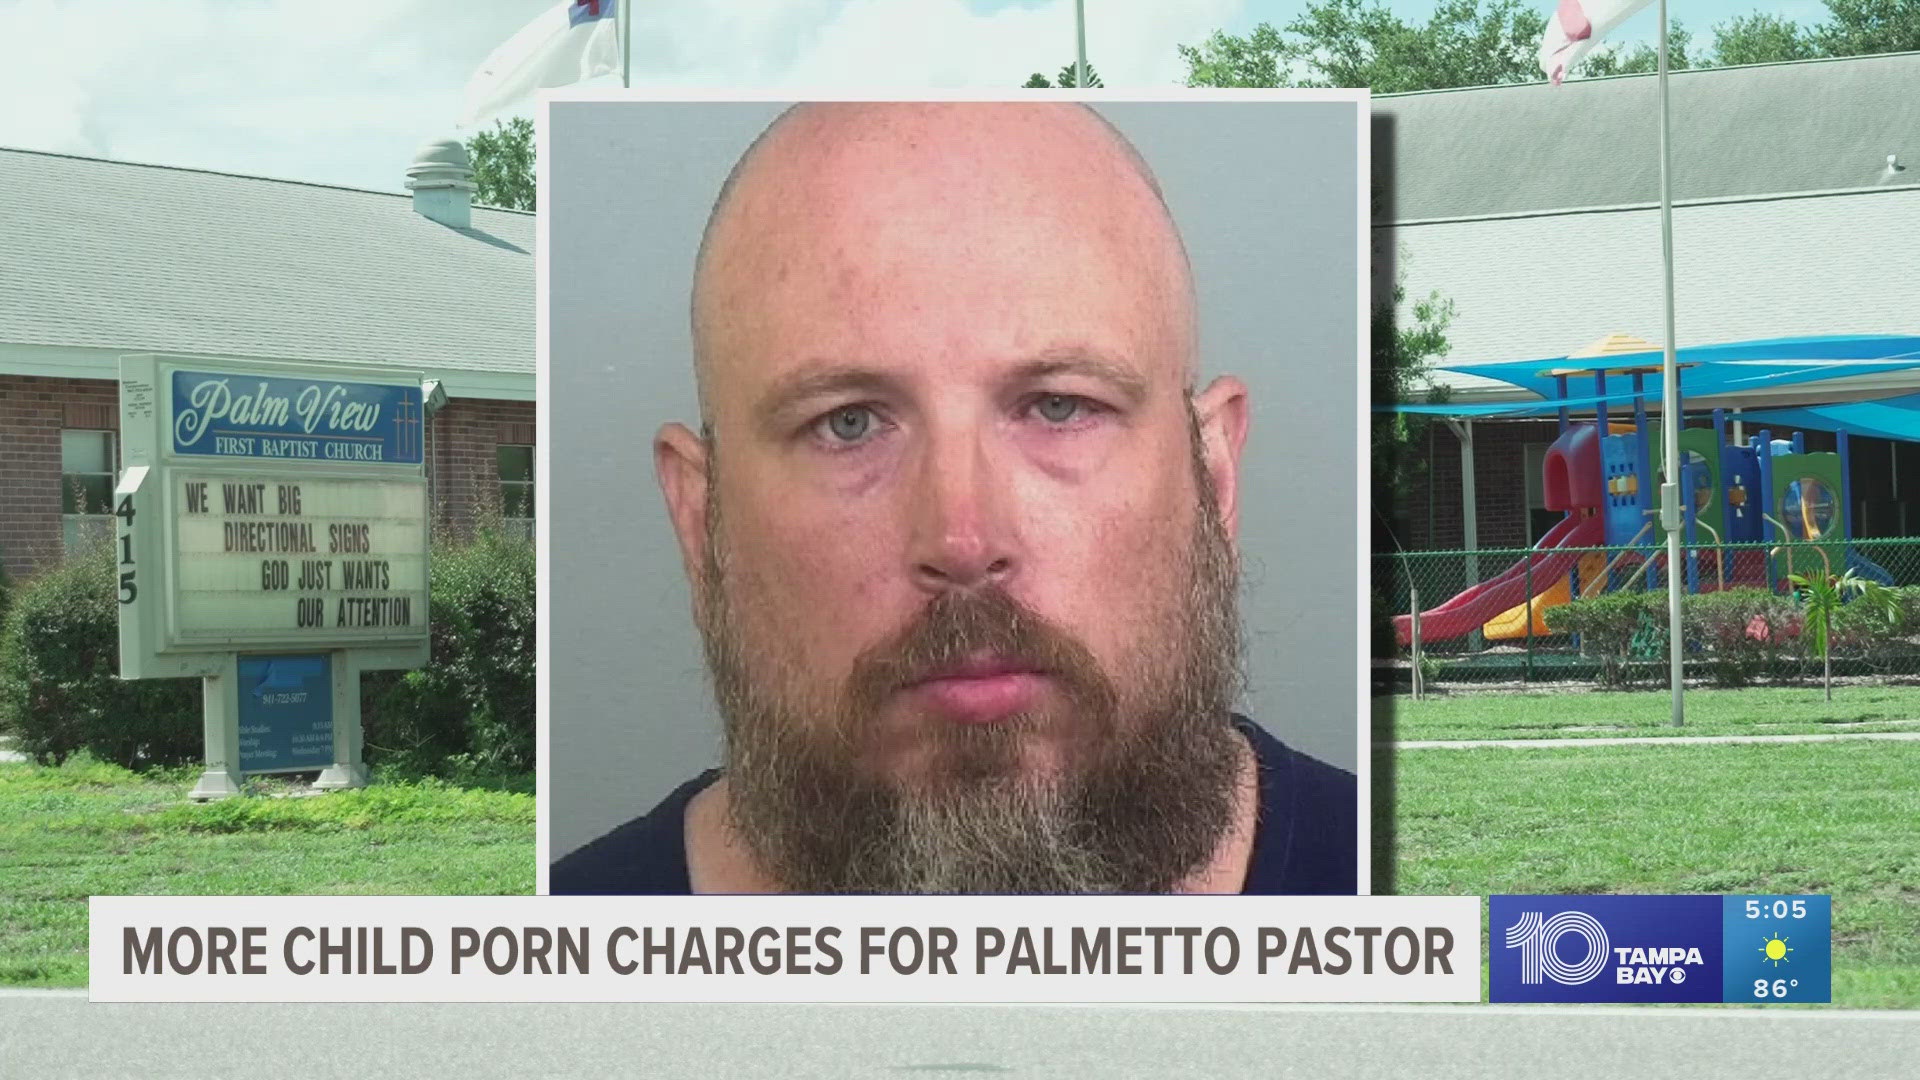 Jonathan Elwing resigned as senior pastor of Palm View First Baptist Church after his arrest.